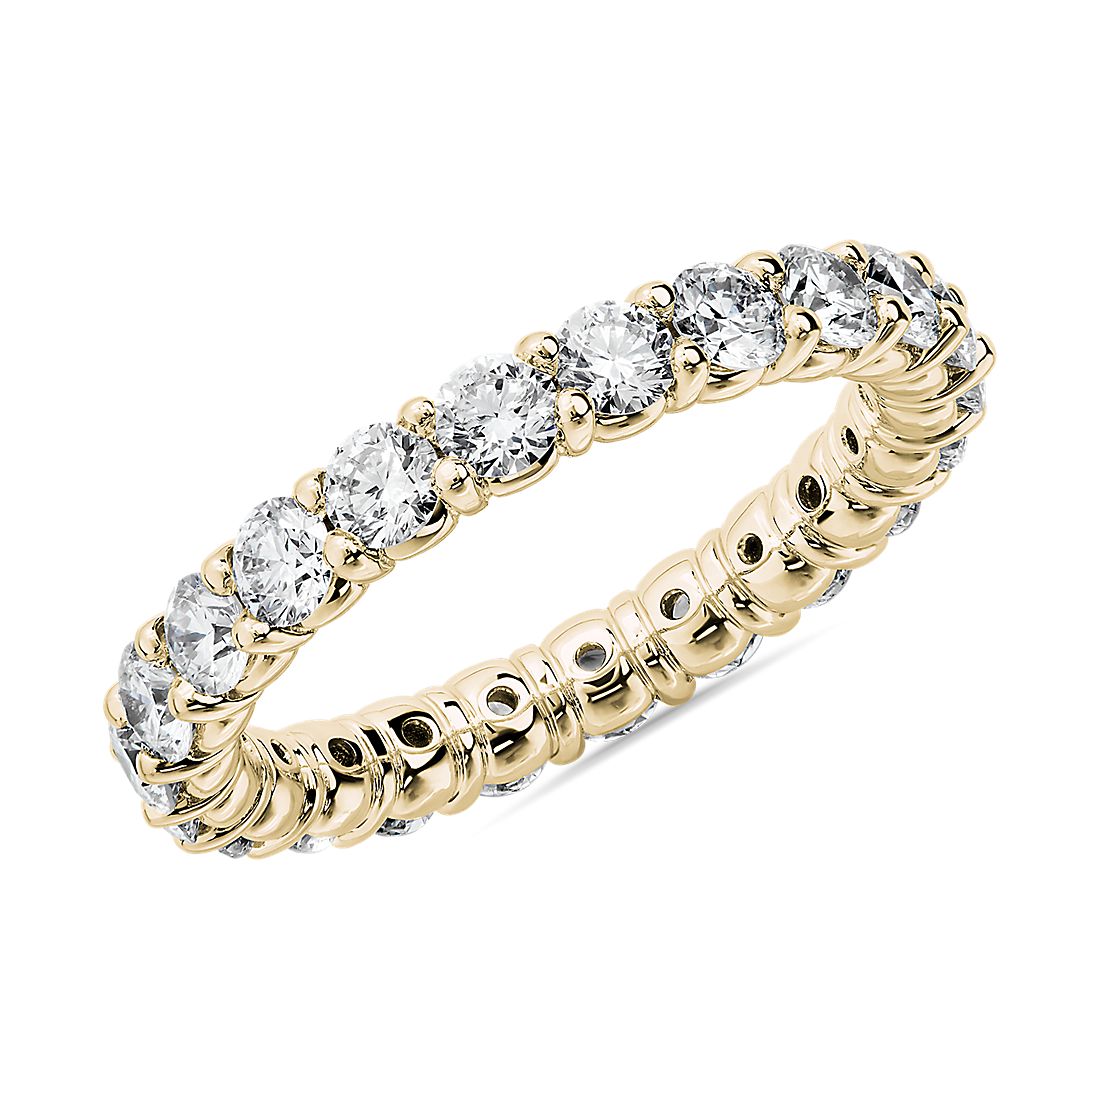 Comfort Fit Round Brilliant Diamond Eternity Ring in 14k Yellow Gold (1.80 ct. tw.)